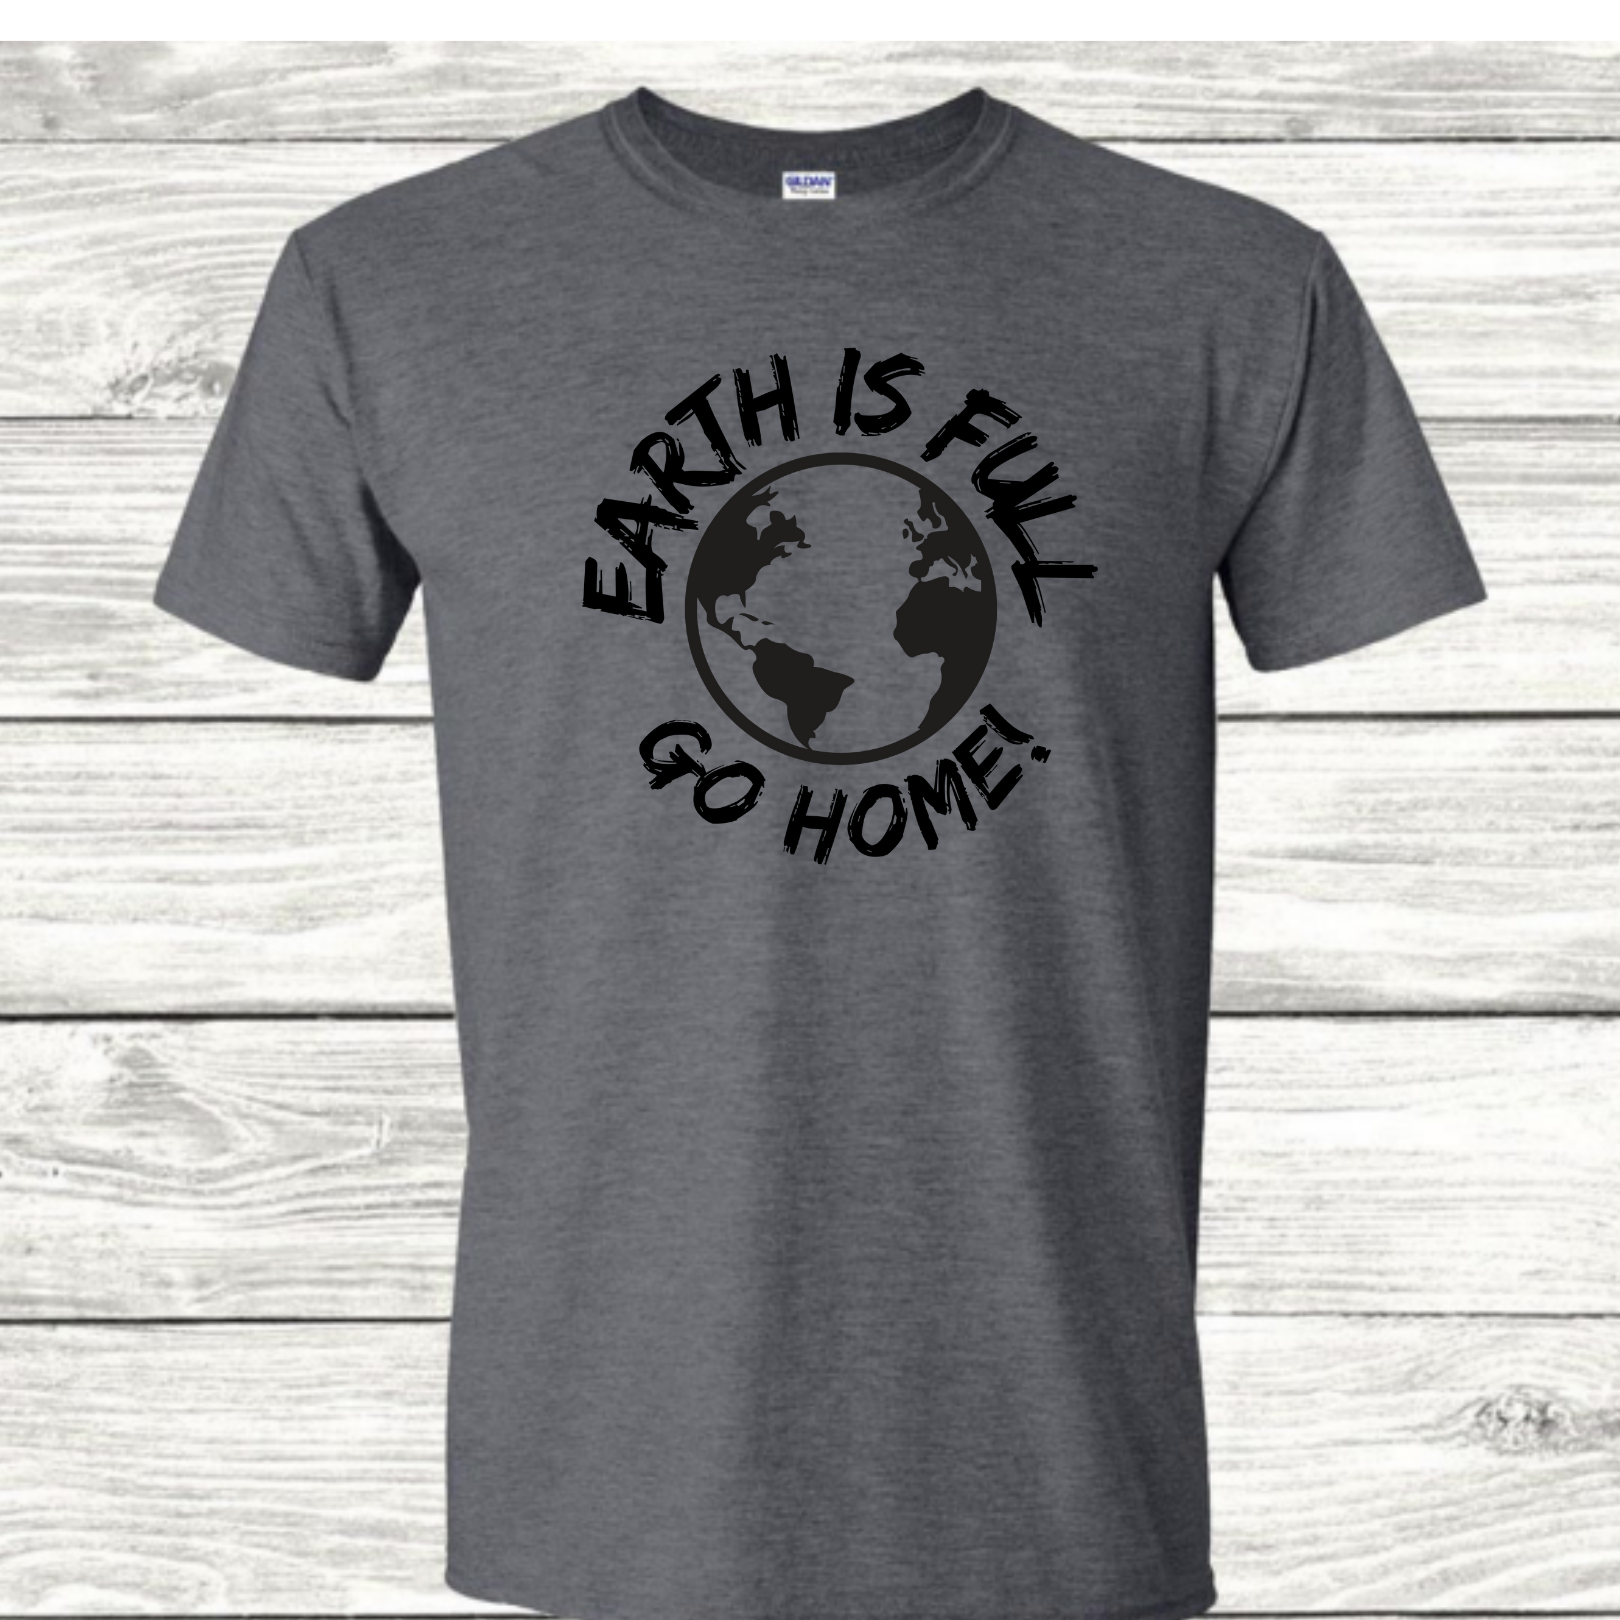 Earth is Full - Go Home! - Graphic Funny Sarcastic Humor T-Shirt - Mister Snarky's